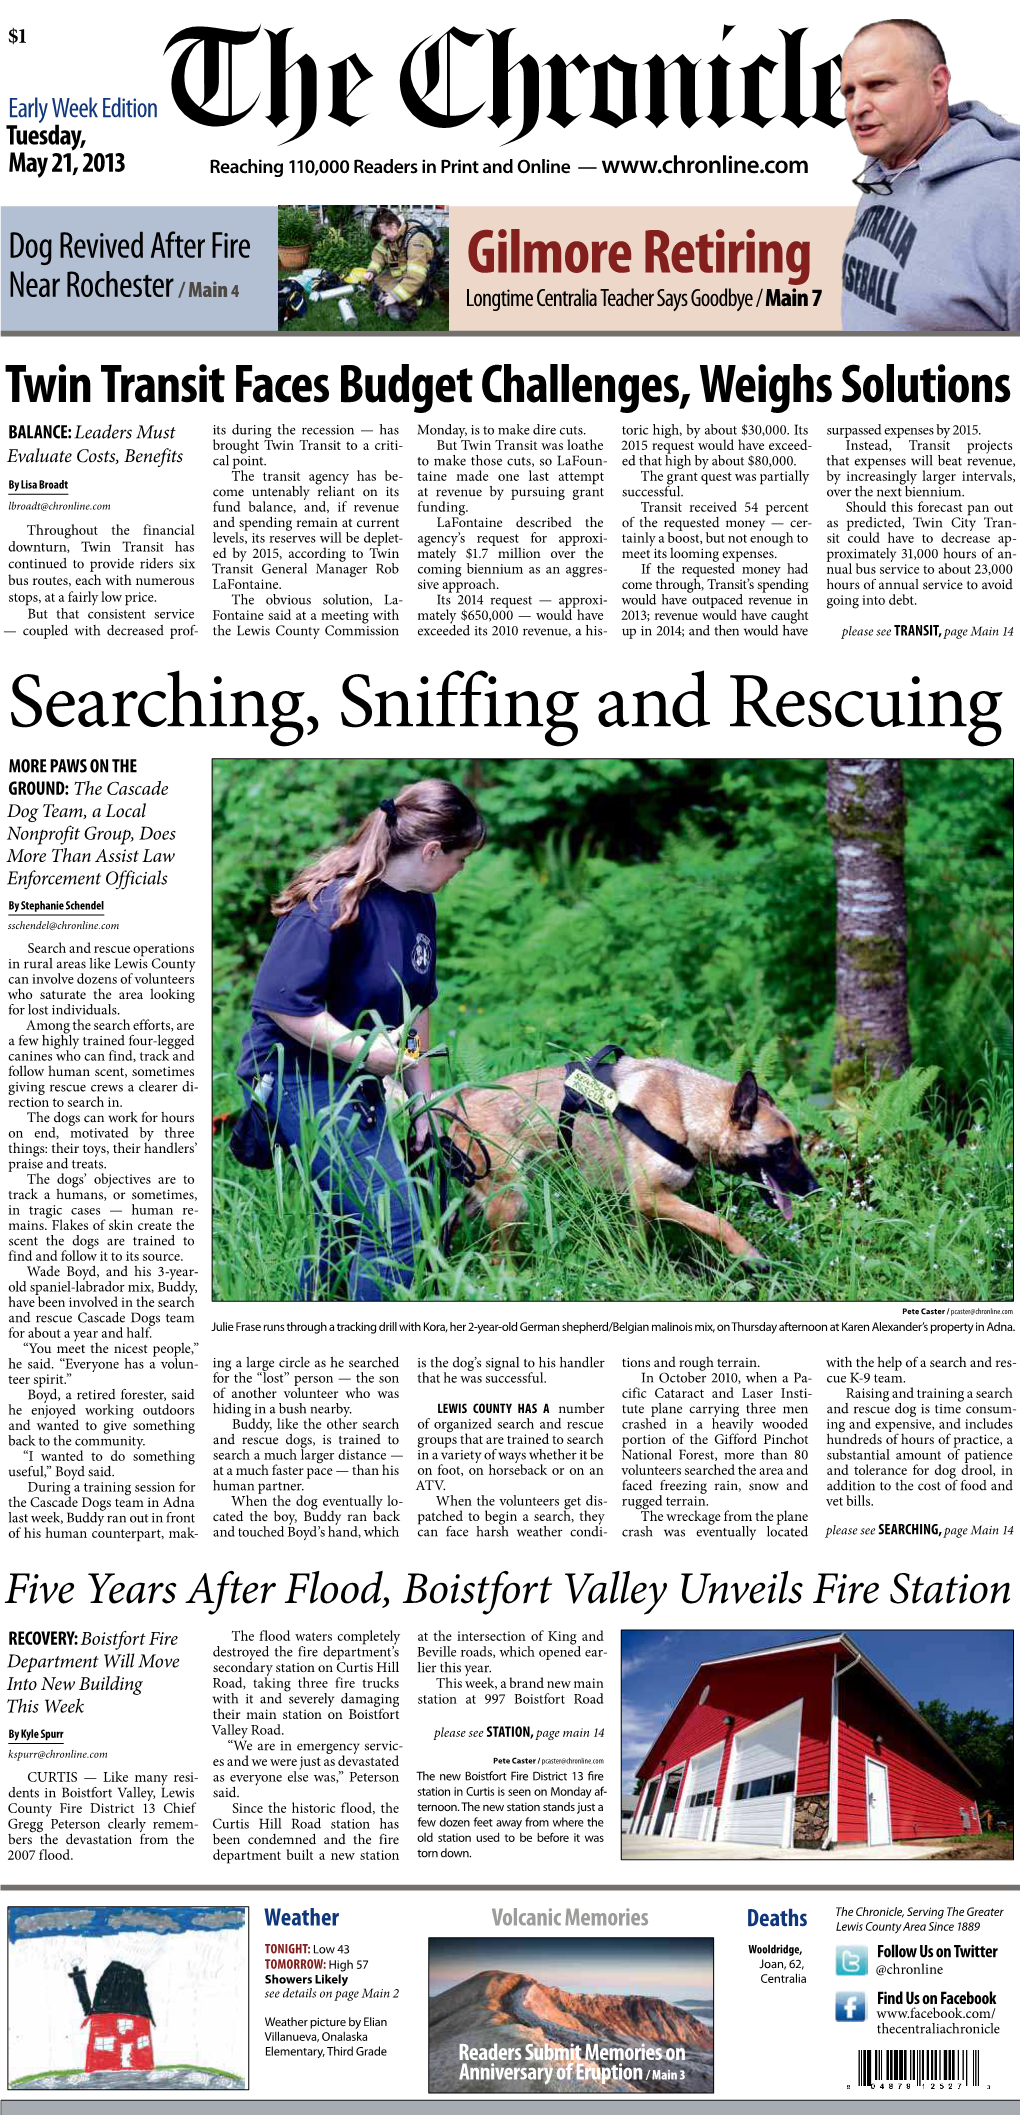 Searching, Sniffing and Rescuing